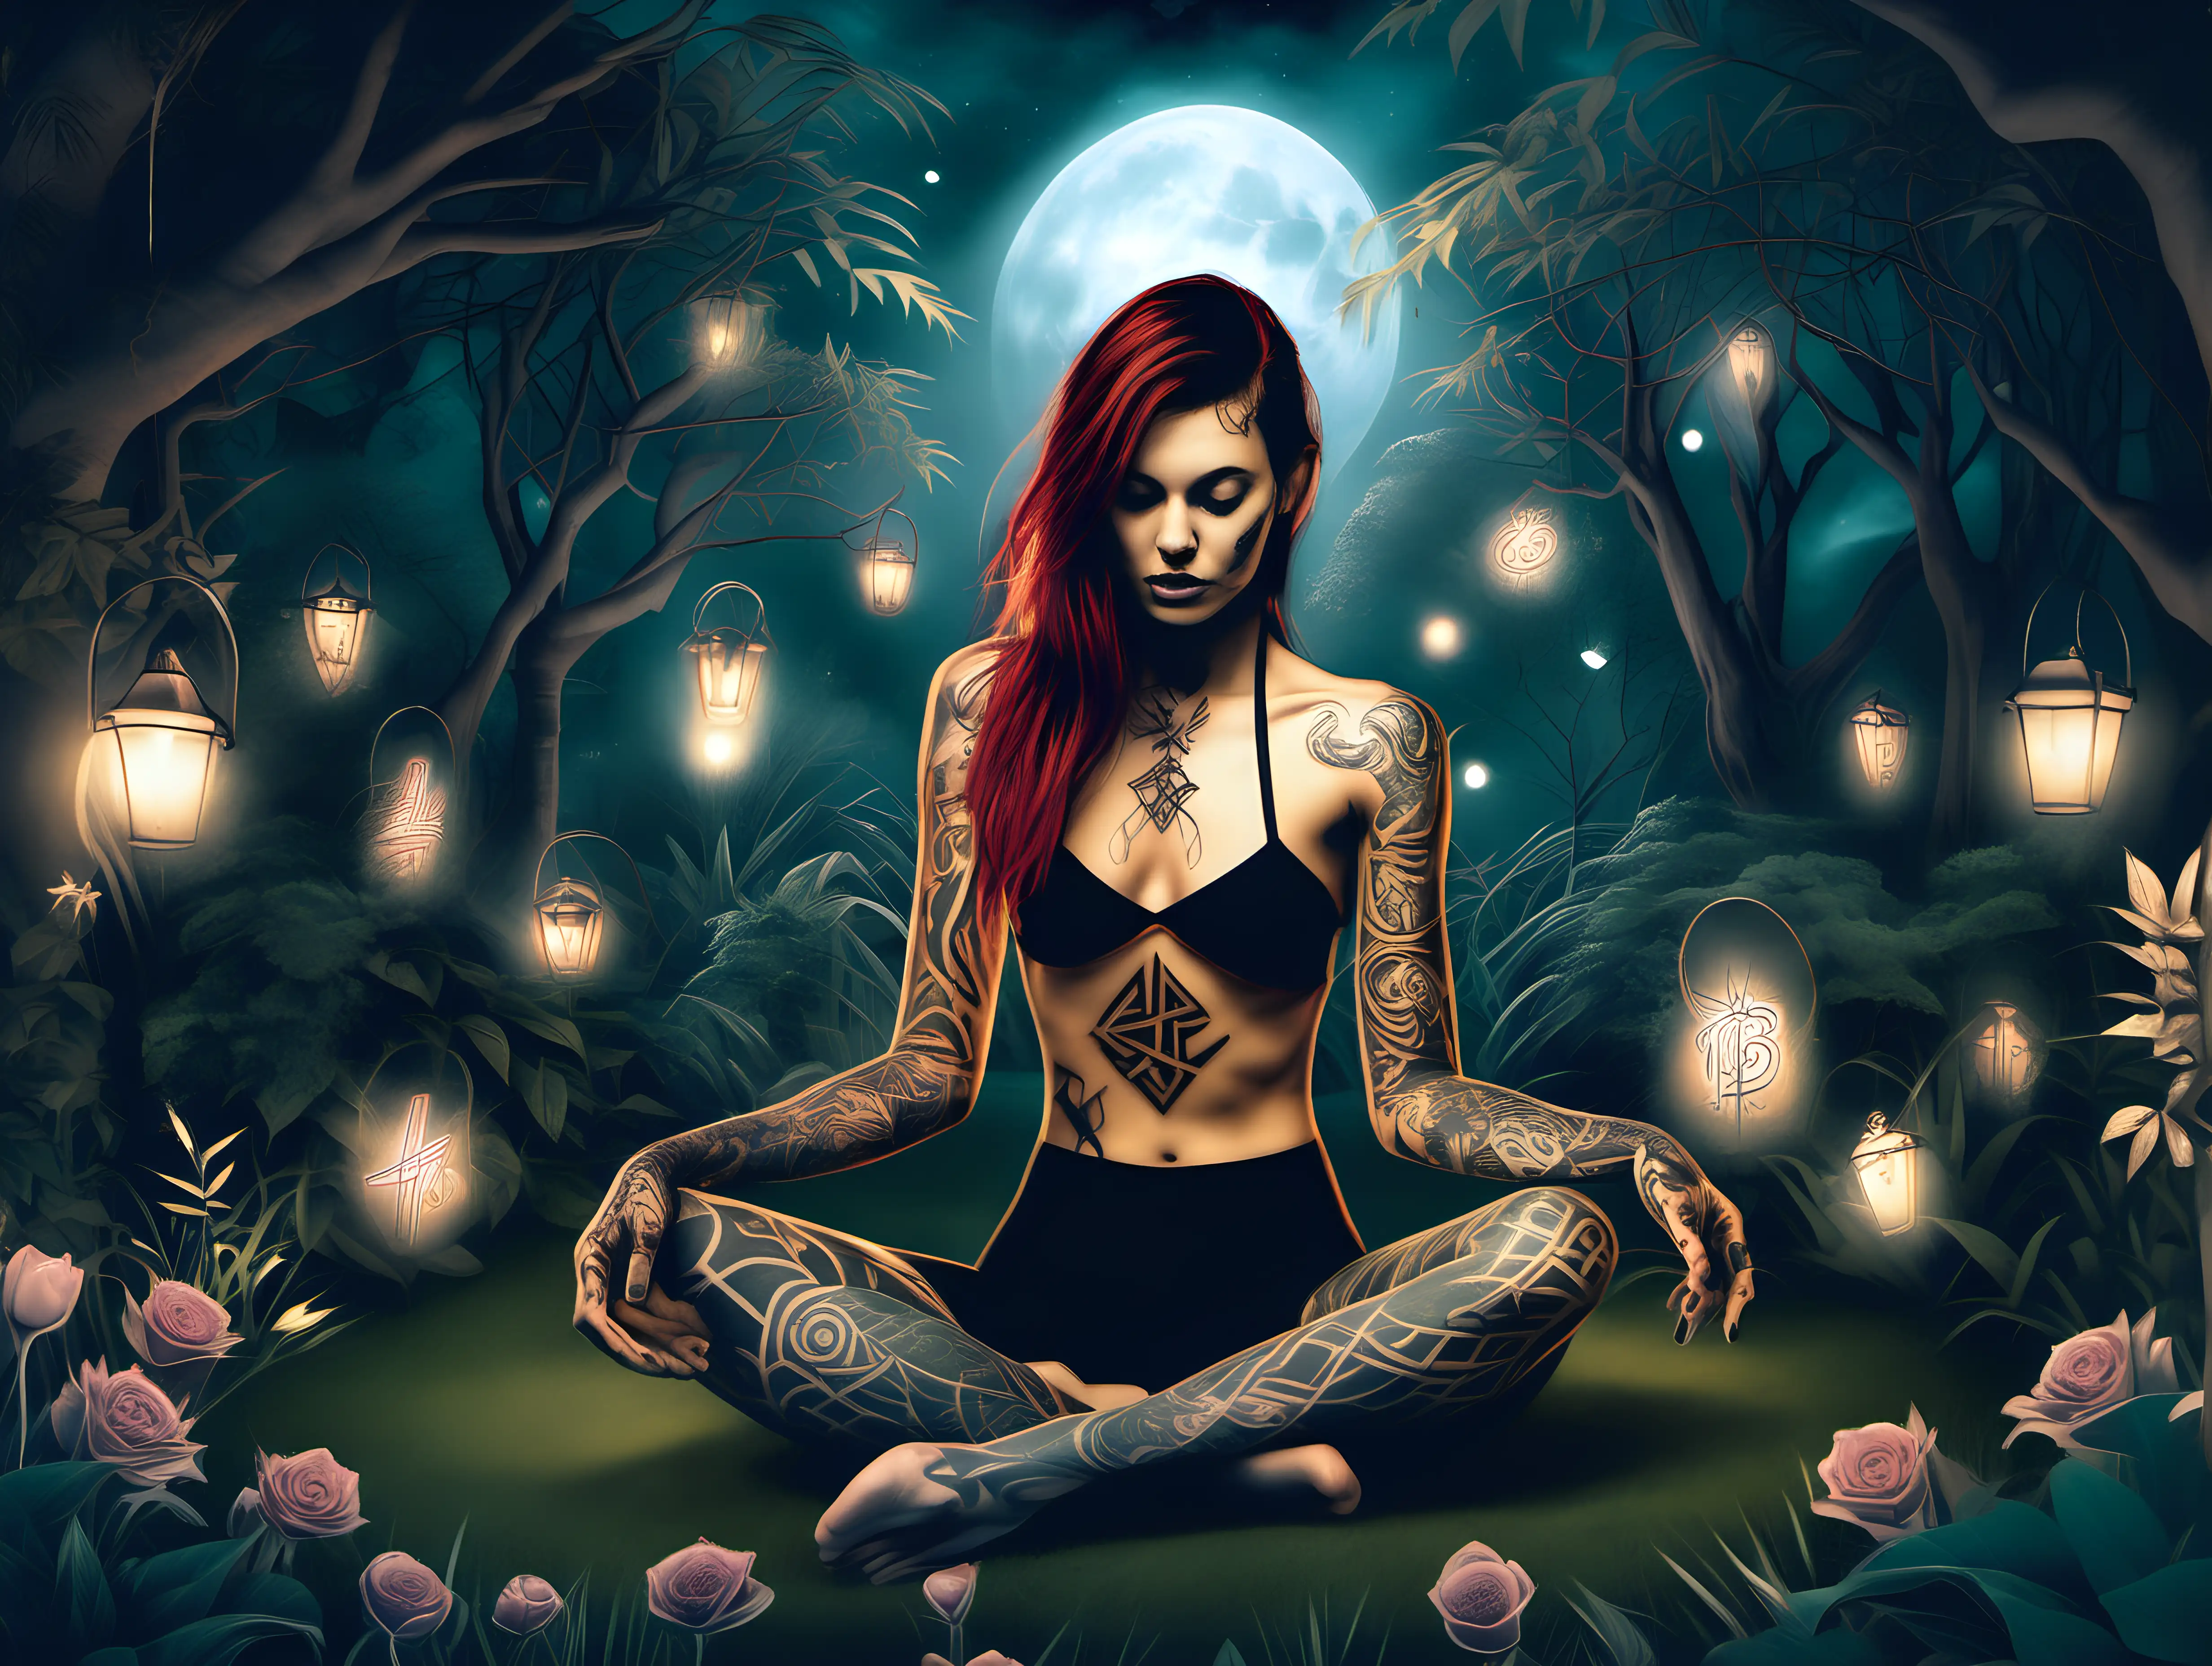 Moonlit Garden Enchantment with Draconic Runes Tattooed Woman